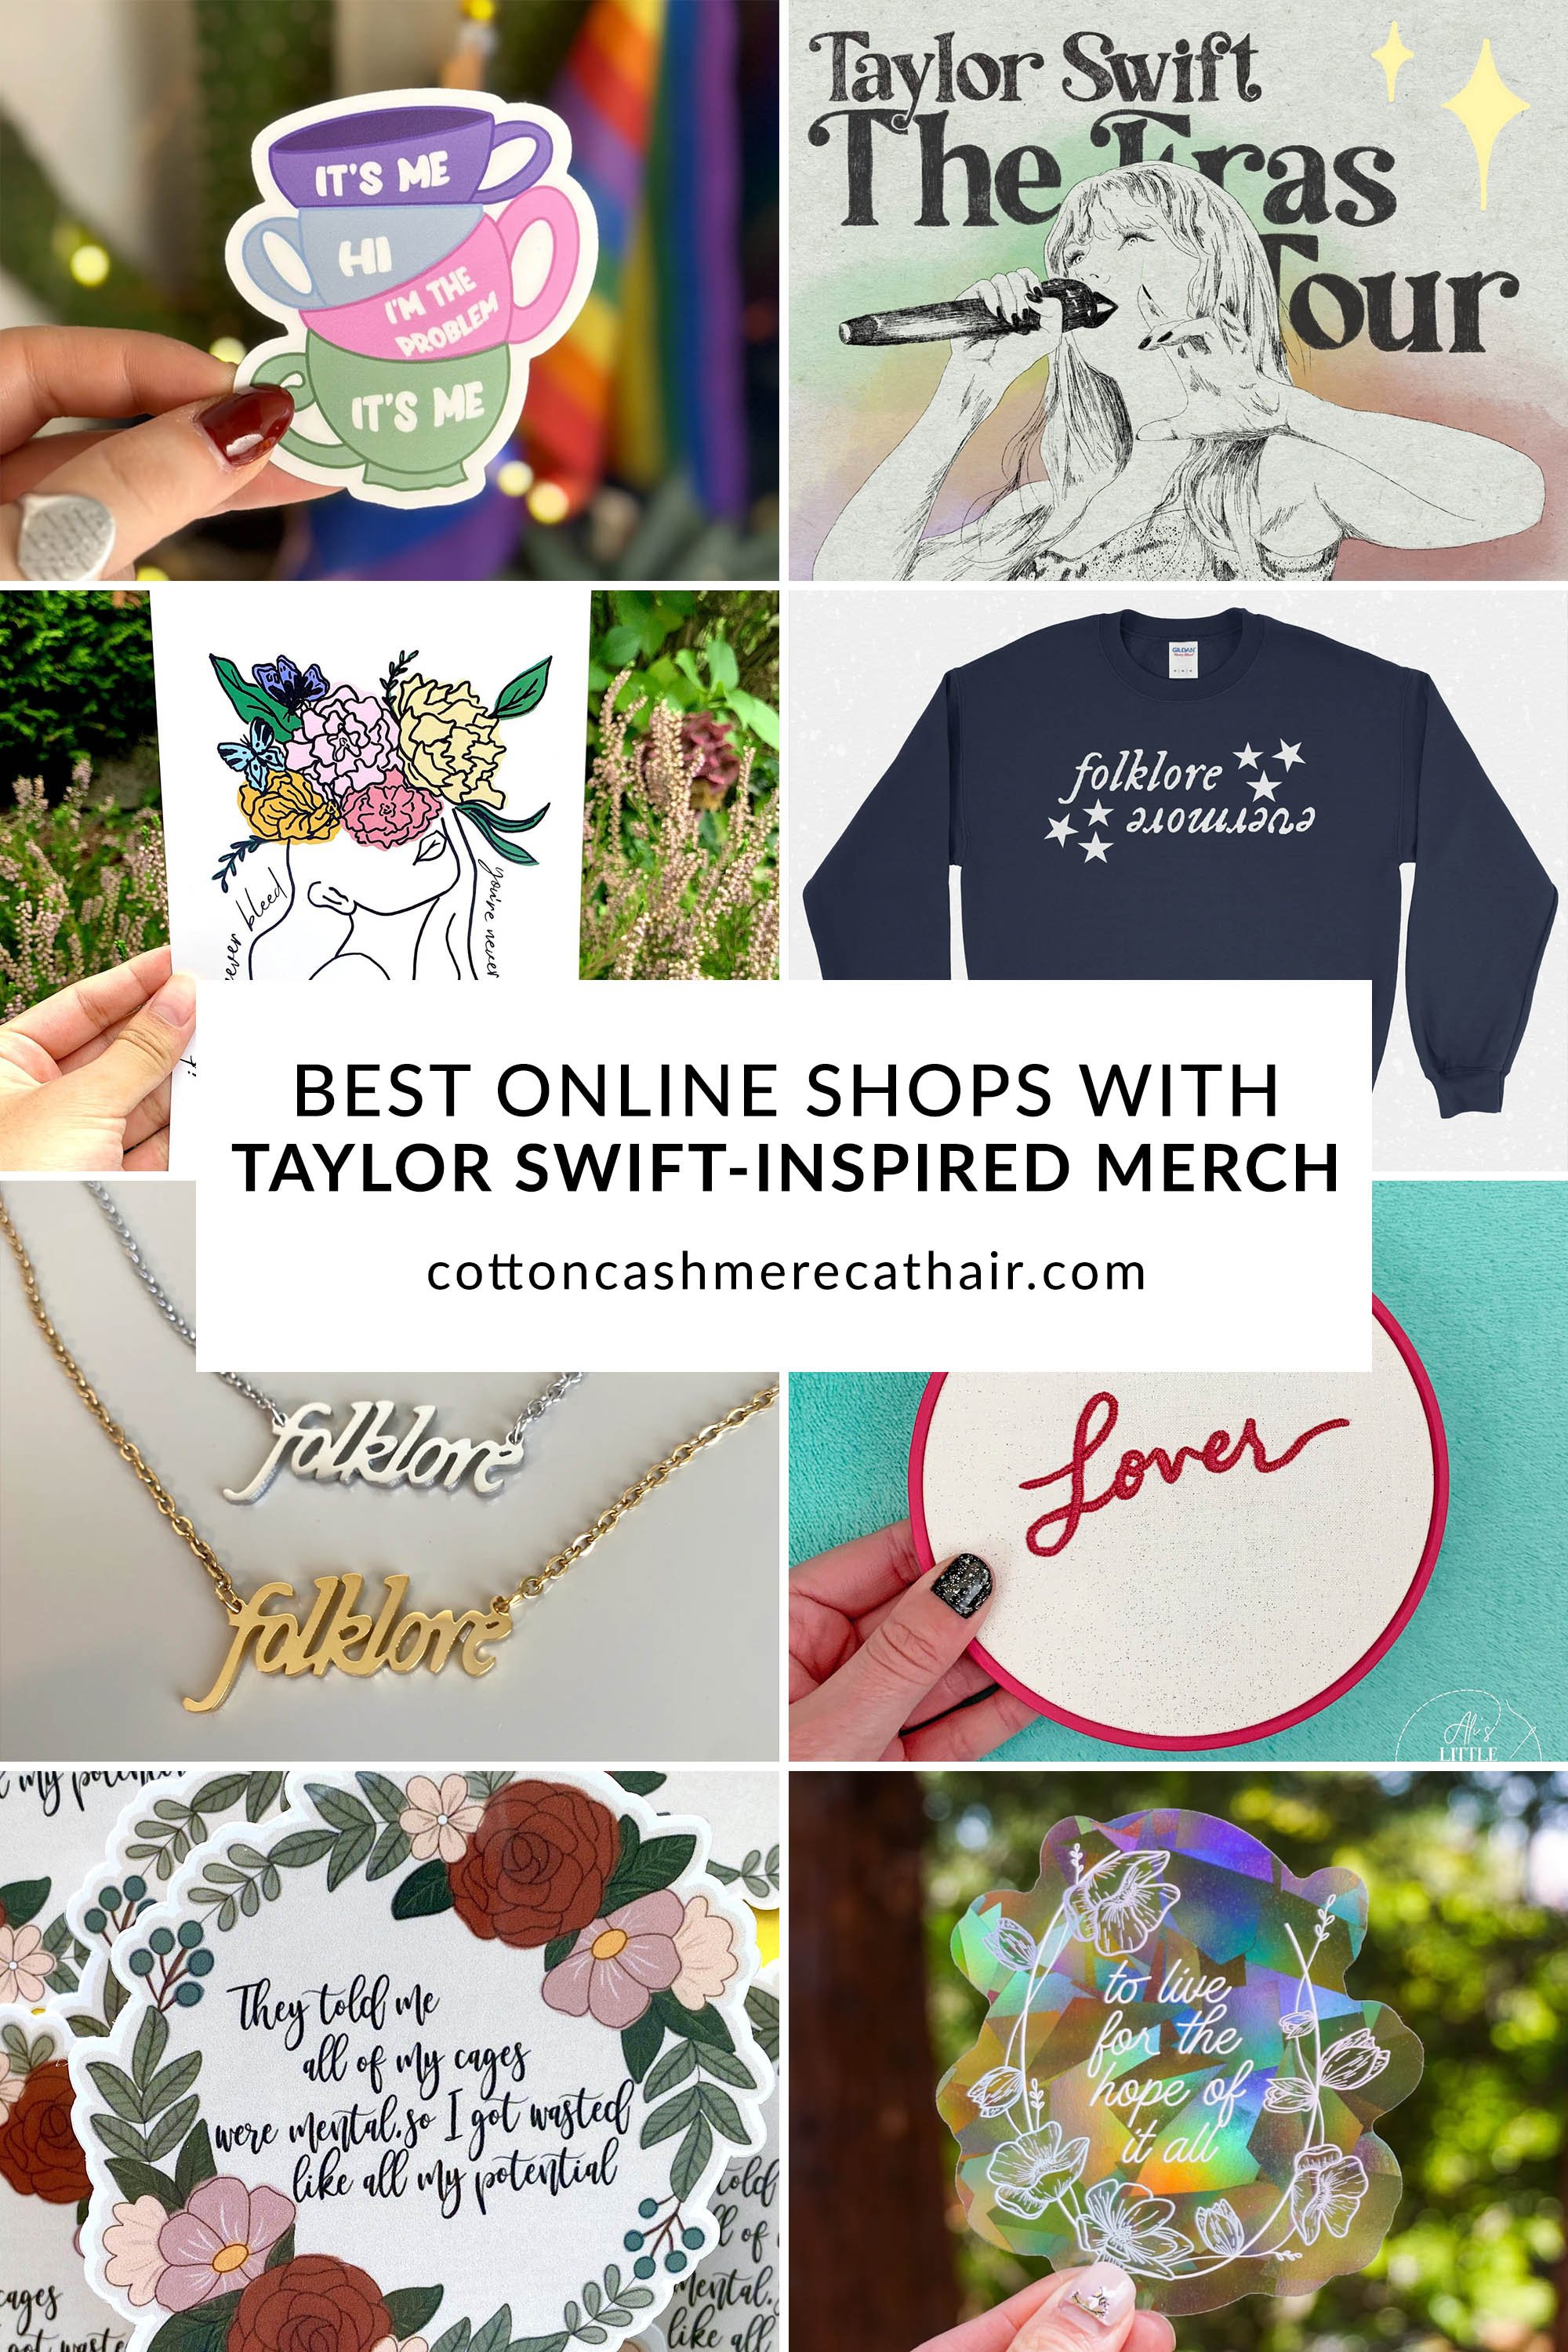 All the Taylor Swift Merch I Own - CDs, apparel, decor, etc // Taylor Swift  Merch Collection 